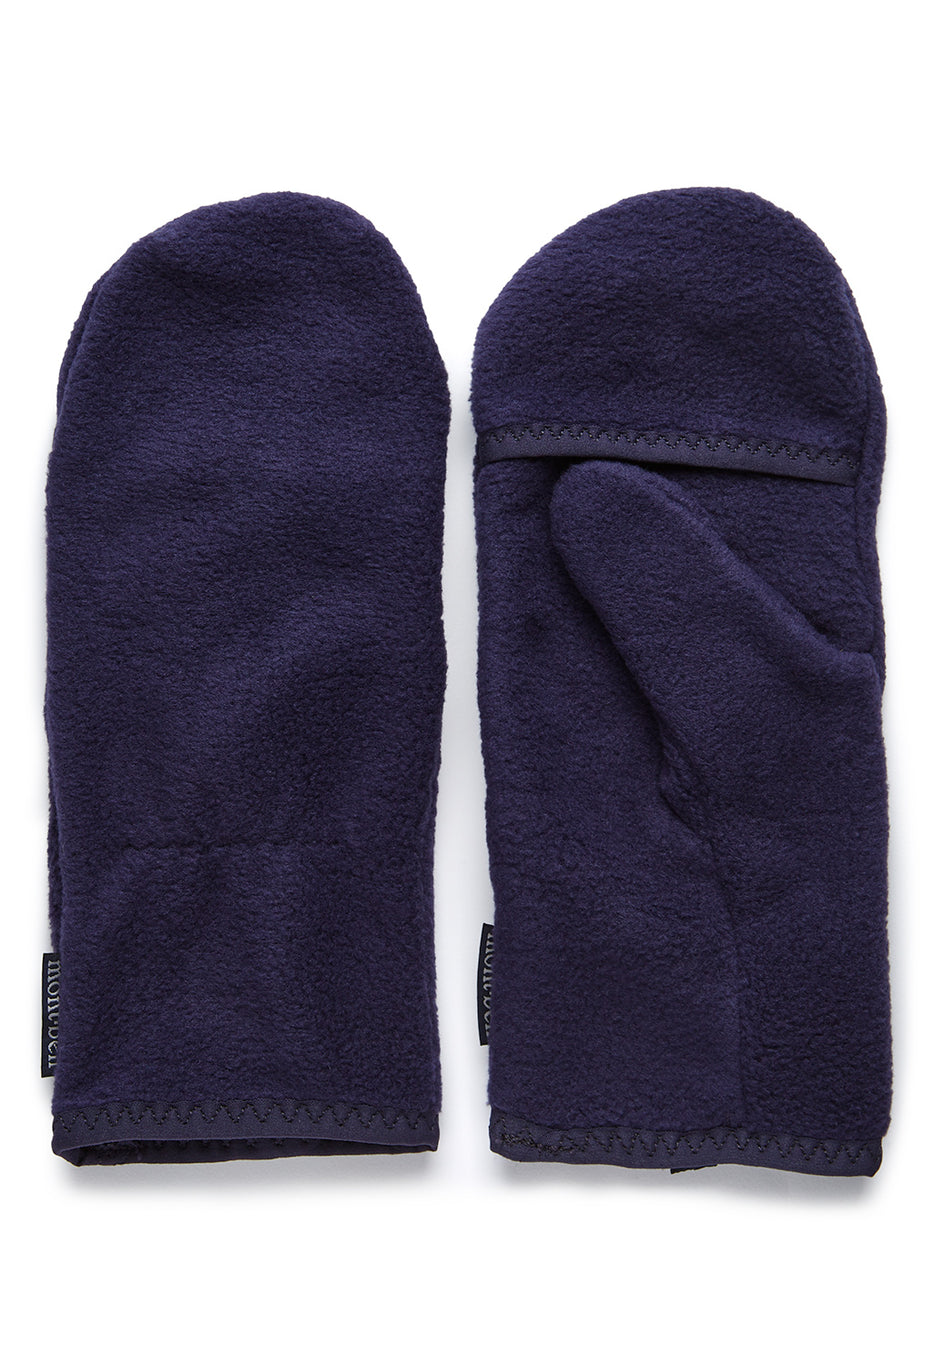 Montbell Climaplus 200 Mittens 5